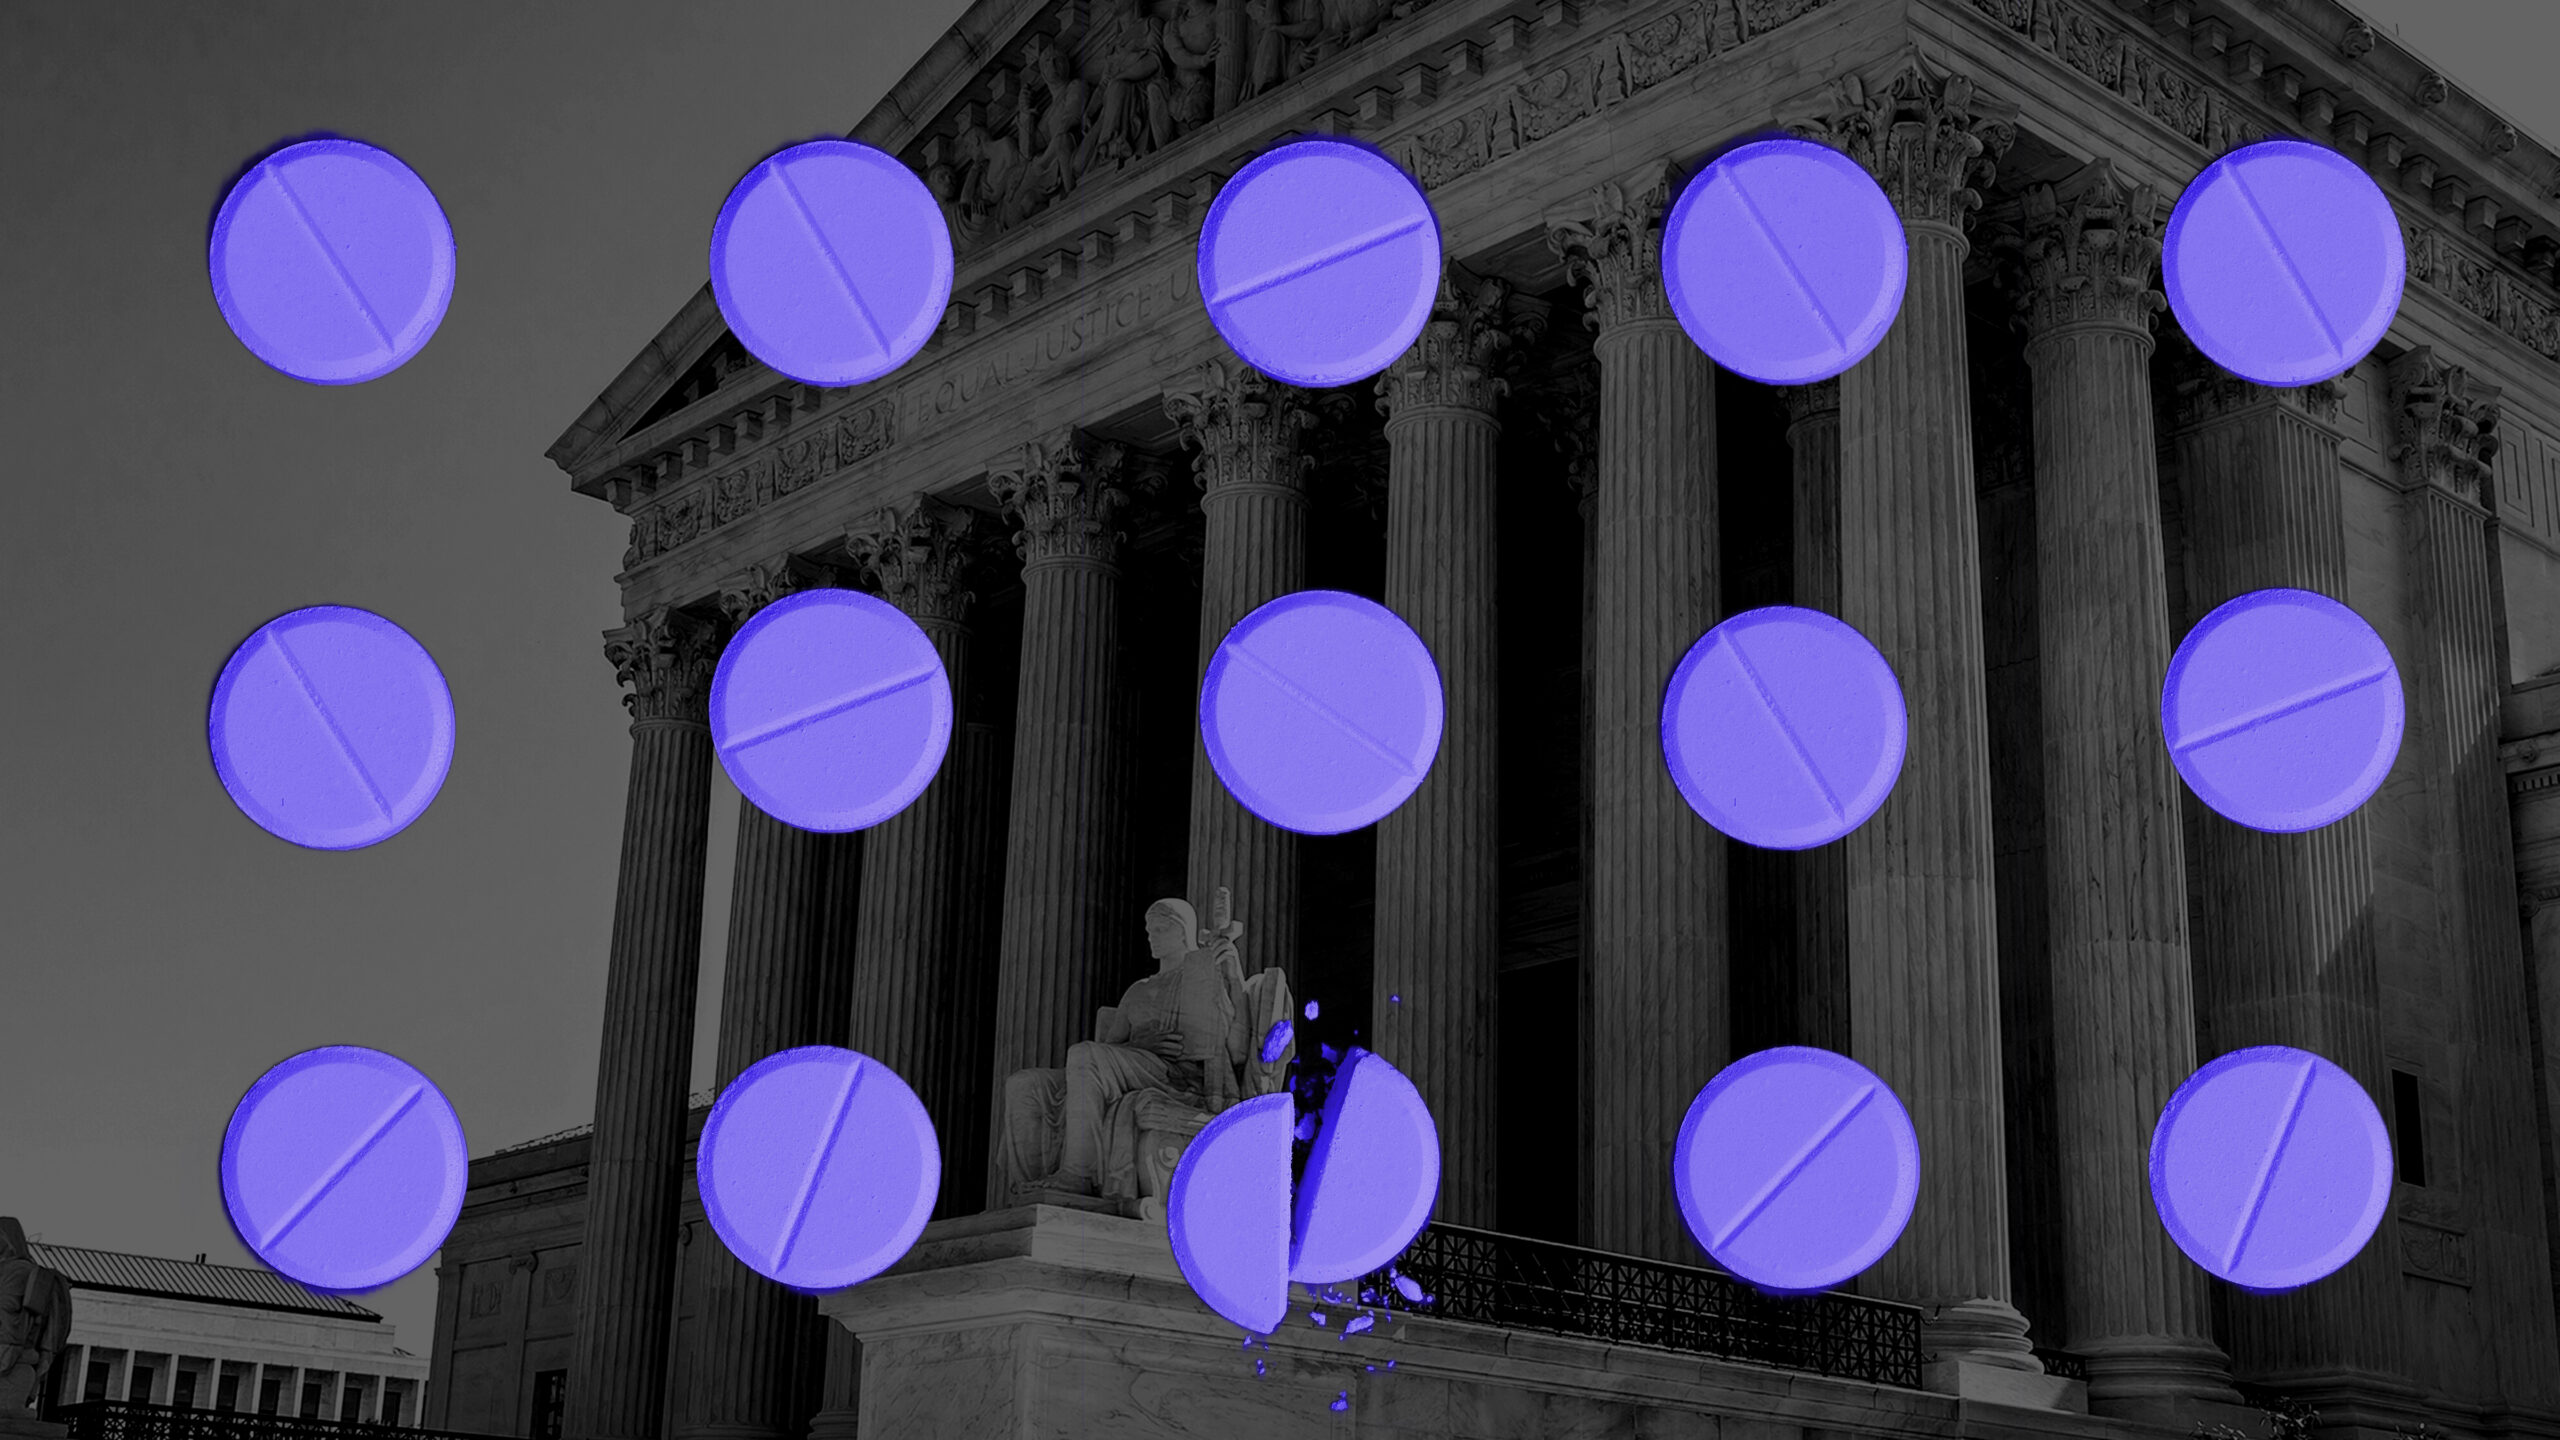 Mock Trial: Should the Courts Restrict Access to the Abortion Pill?